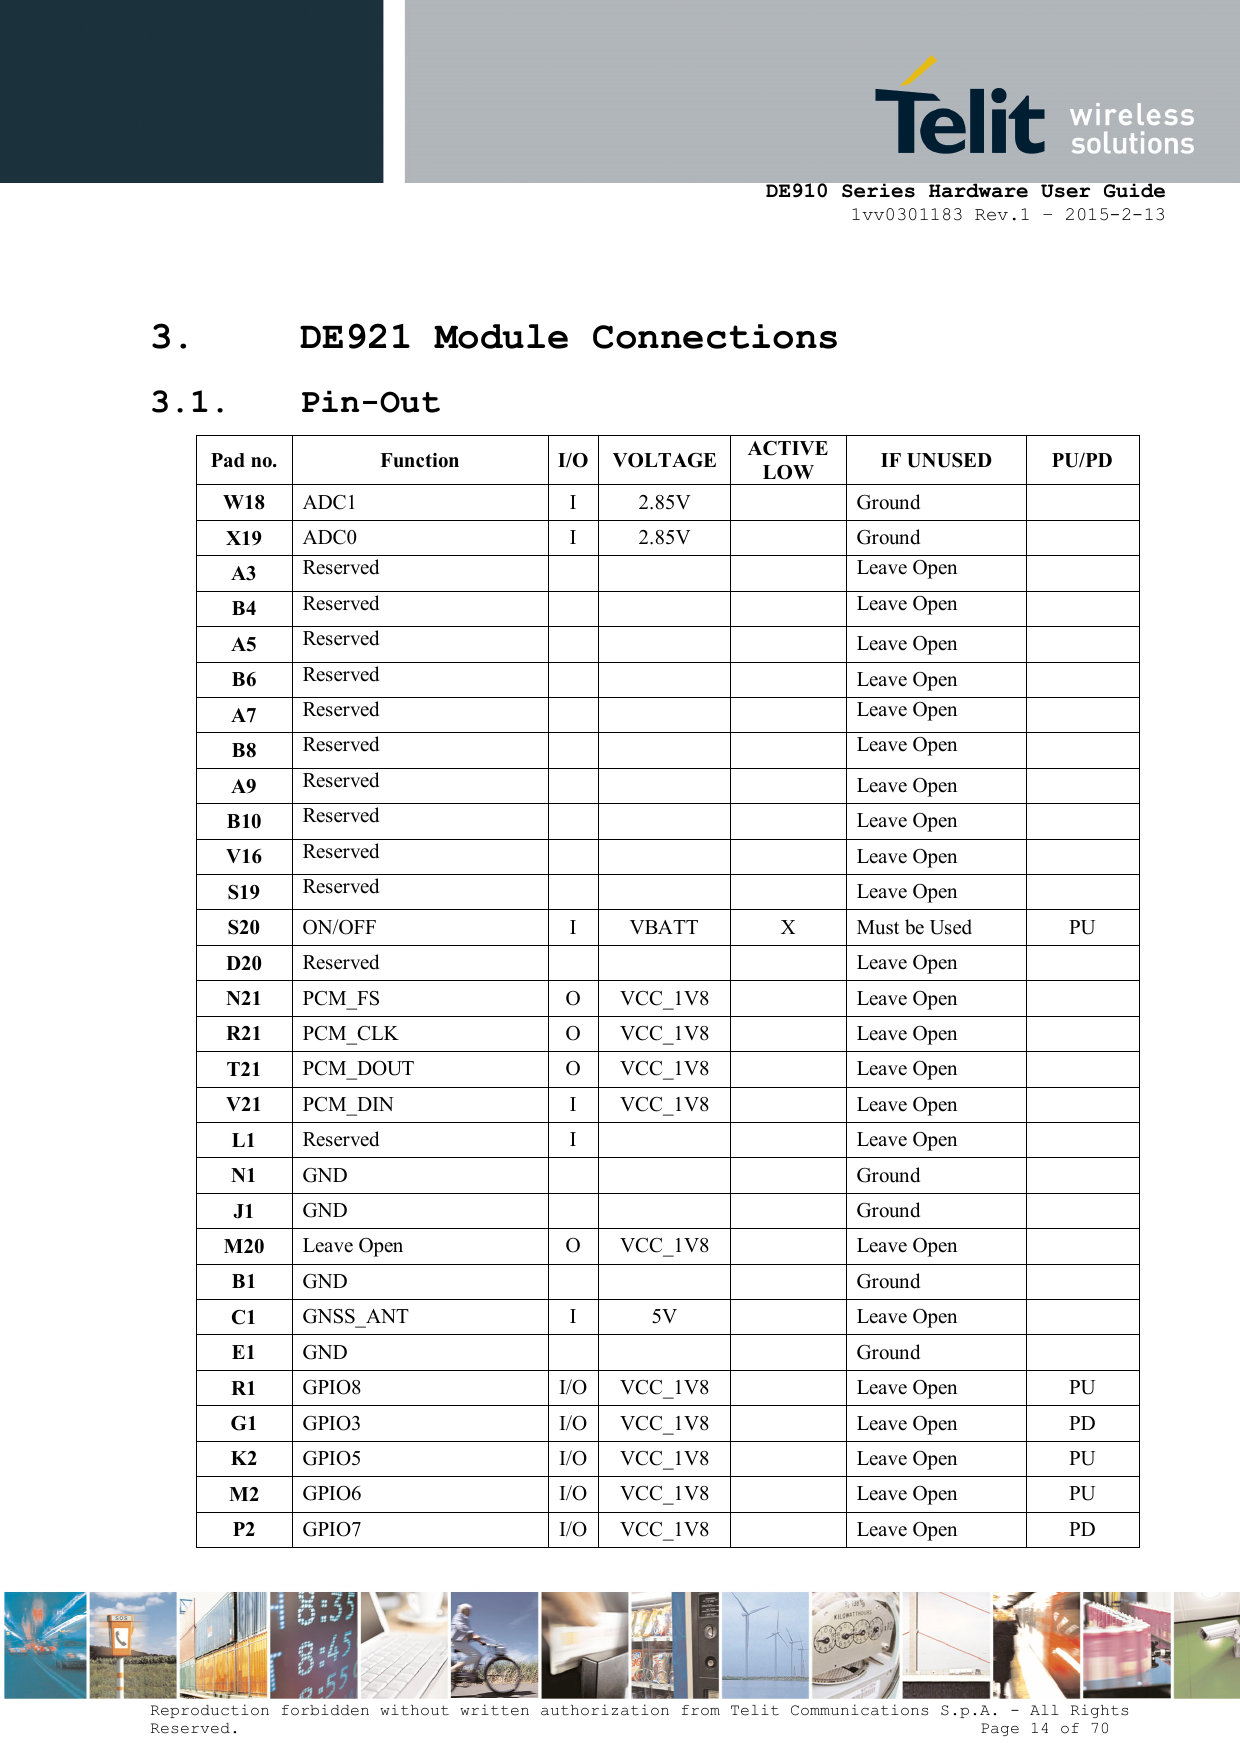      DE910 Series Hardware User Guide 1vv0301183 Rev.1 – 2015-2-13 Reproduction forbidden without written authorization from Telit Communications S.p.A. - All Rights Reserved.                                                                          Page 14 of 70 3. DE921 Module Connections 3.1. Pin-Out Pad no. Function  I/O VOLTAGE ACTIVE LOW  IF UNUSED  PU/PD W18  ADC1  I  2.85V     Ground    X19  ADC0  I  2.85V     Ground    A3 Reserved      Leave Open   B4 Reserved      Leave Open   A5 Reserved       Leave Open    B6 Reserved       Leave Open    A7 Reserved      Leave Open   B8 Reserved      Leave Open   A9 Reserved       Leave Open    B10 Reserved       Leave Open    V16 Reserved       Leave Open    S19 Reserved       Leave Open    S20  ON/OFF  I  VBATT  X  Must be Used  PU D20  Reserved        Leave Open    N21  PCM_FS  O VCC_1V8     Leave Open    R21  PCM_CLK  O VCC_1V8     Leave Open    T21  PCM_DOUT  O VCC_1V8     Leave Open    V21  PCM_DIN  I  VCC_1V8     Leave Open    L1  Reserved  I       Leave Open    N1  GND         Ground    J1  GND         Ground    M20  Leave Open  O VCC_1V8     Leave Open    B1  GND         Ground    C1  GNSS_ANT  I  5V     Leave Open    E1  GND         Ground    R1  GPIO8  I/O VCC_1V8     Leave Open  PU G1  GPIO3  I/O VCC_1V8     Leave Open  PD K2  GPIO5  I/O VCC_1V8     Leave Open  PU M2  GPIO6  I/O VCC_1V8     Leave Open  PU P2  GPIO7  I/O VCC_1V8     Leave Open  PD 